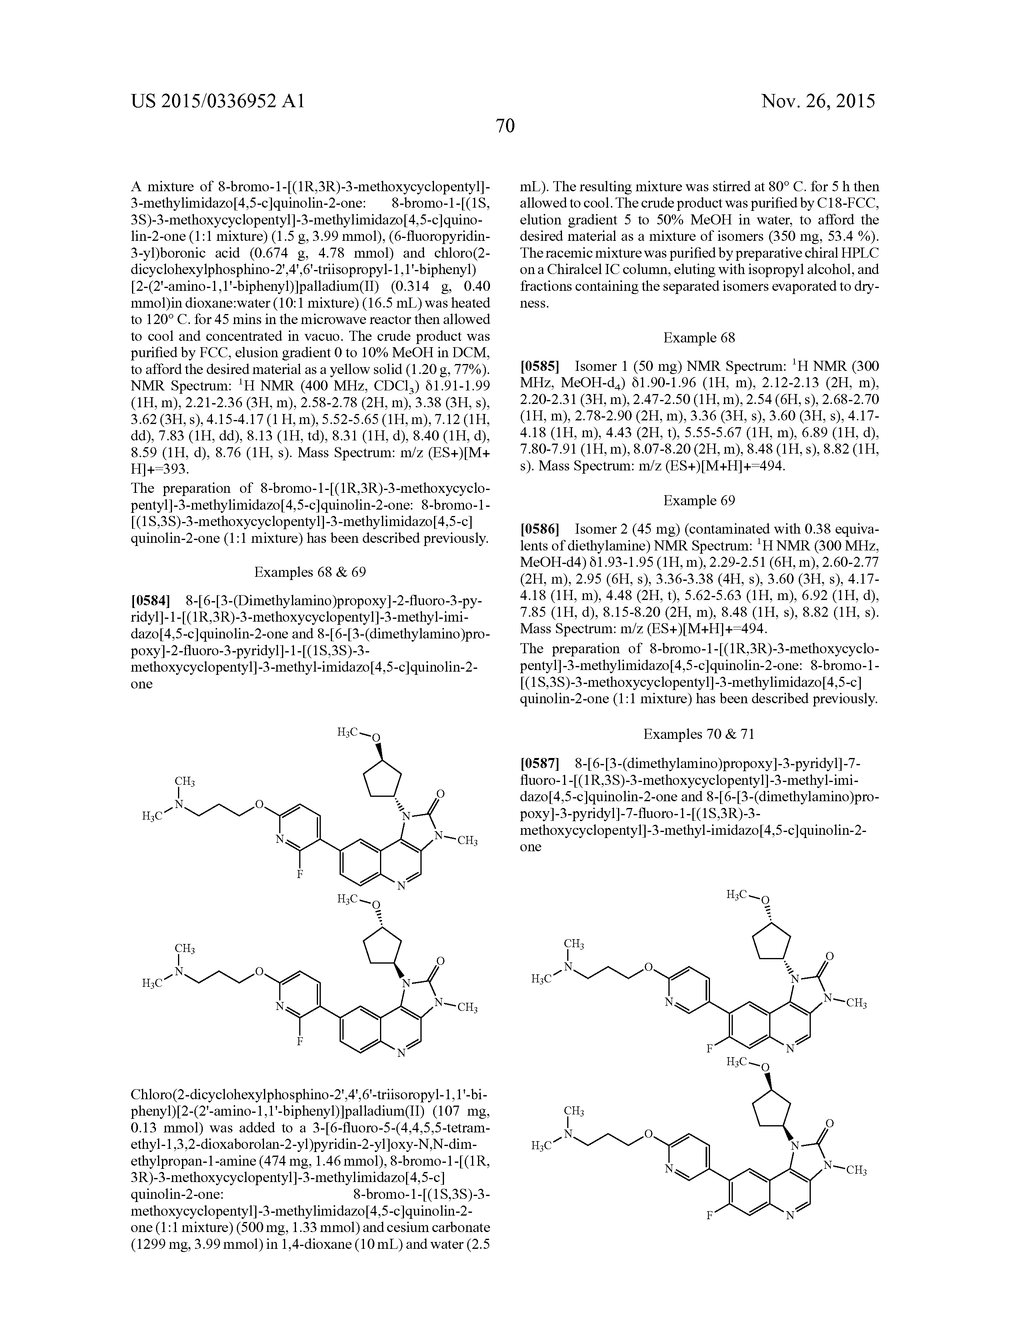 Imidazo[4,5-c]quinolin-2-one Compounds and Their Use in Treating Cancer - diagram, schematic, and image 76